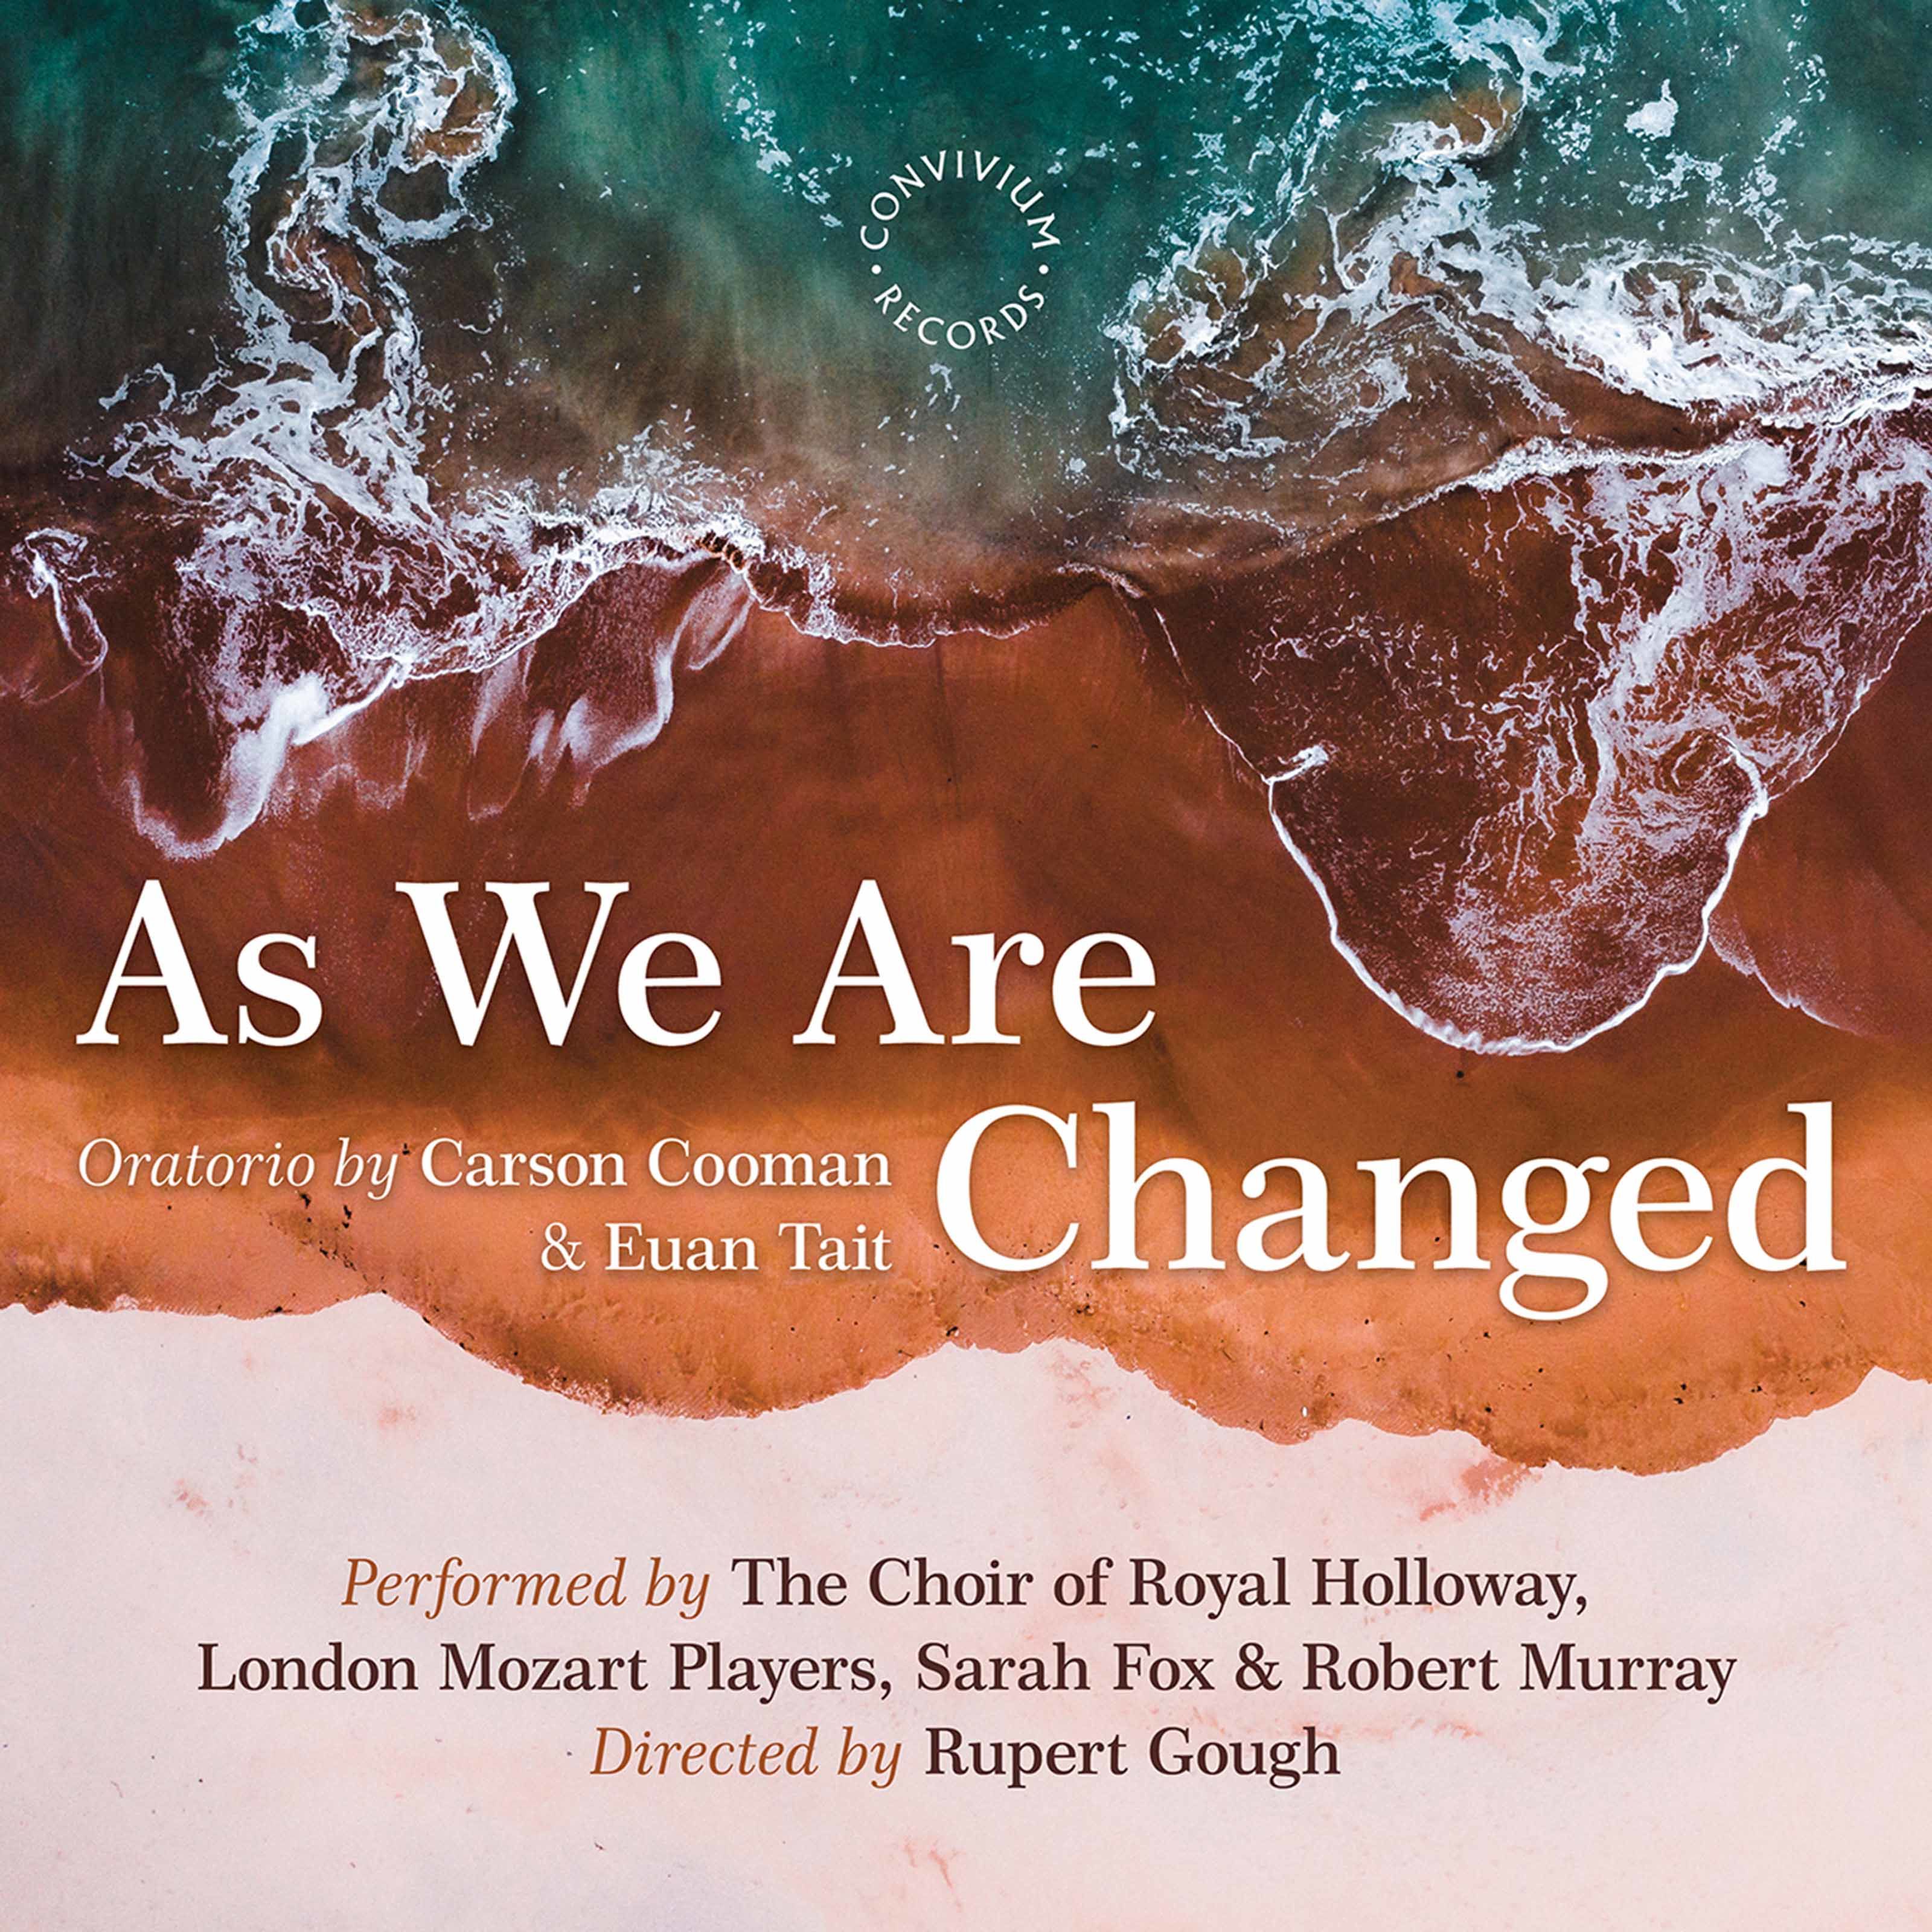 The Choir of Royal Holloway – Carson Cooman- As We Are Changed, Op. 1340